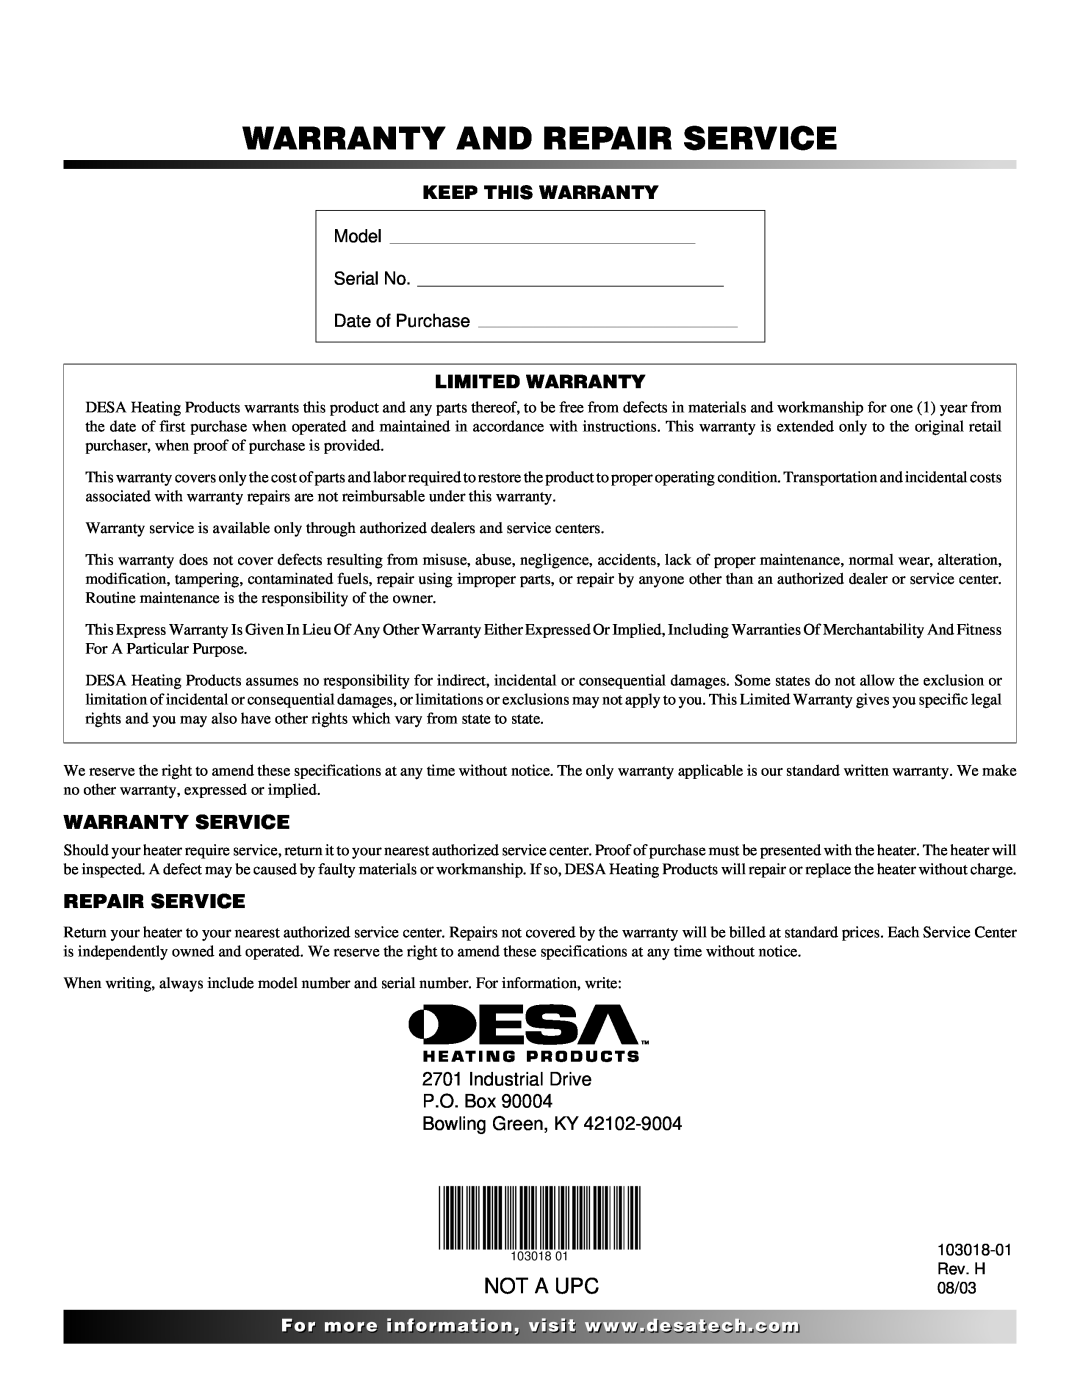 Desa BLP375AT owner manual Warranty And Repair Service, Not A Upc, Warranty Service, Keep This Warranty, Limited Warranty 